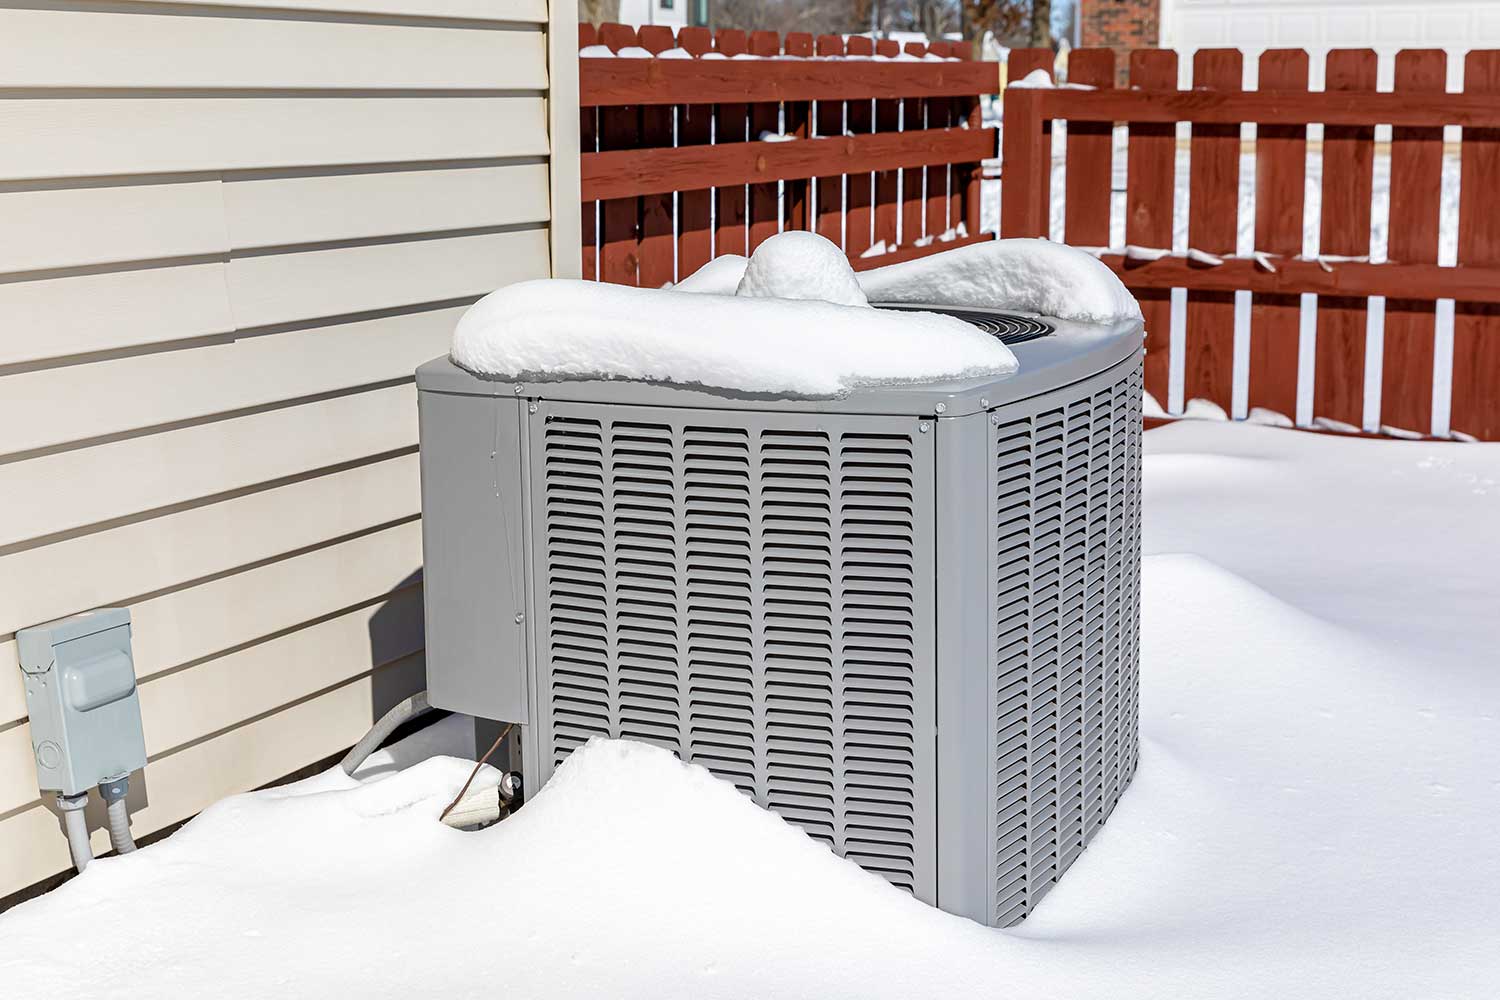 Speculation on how many time your Heating & Air Conditioning system should be checked